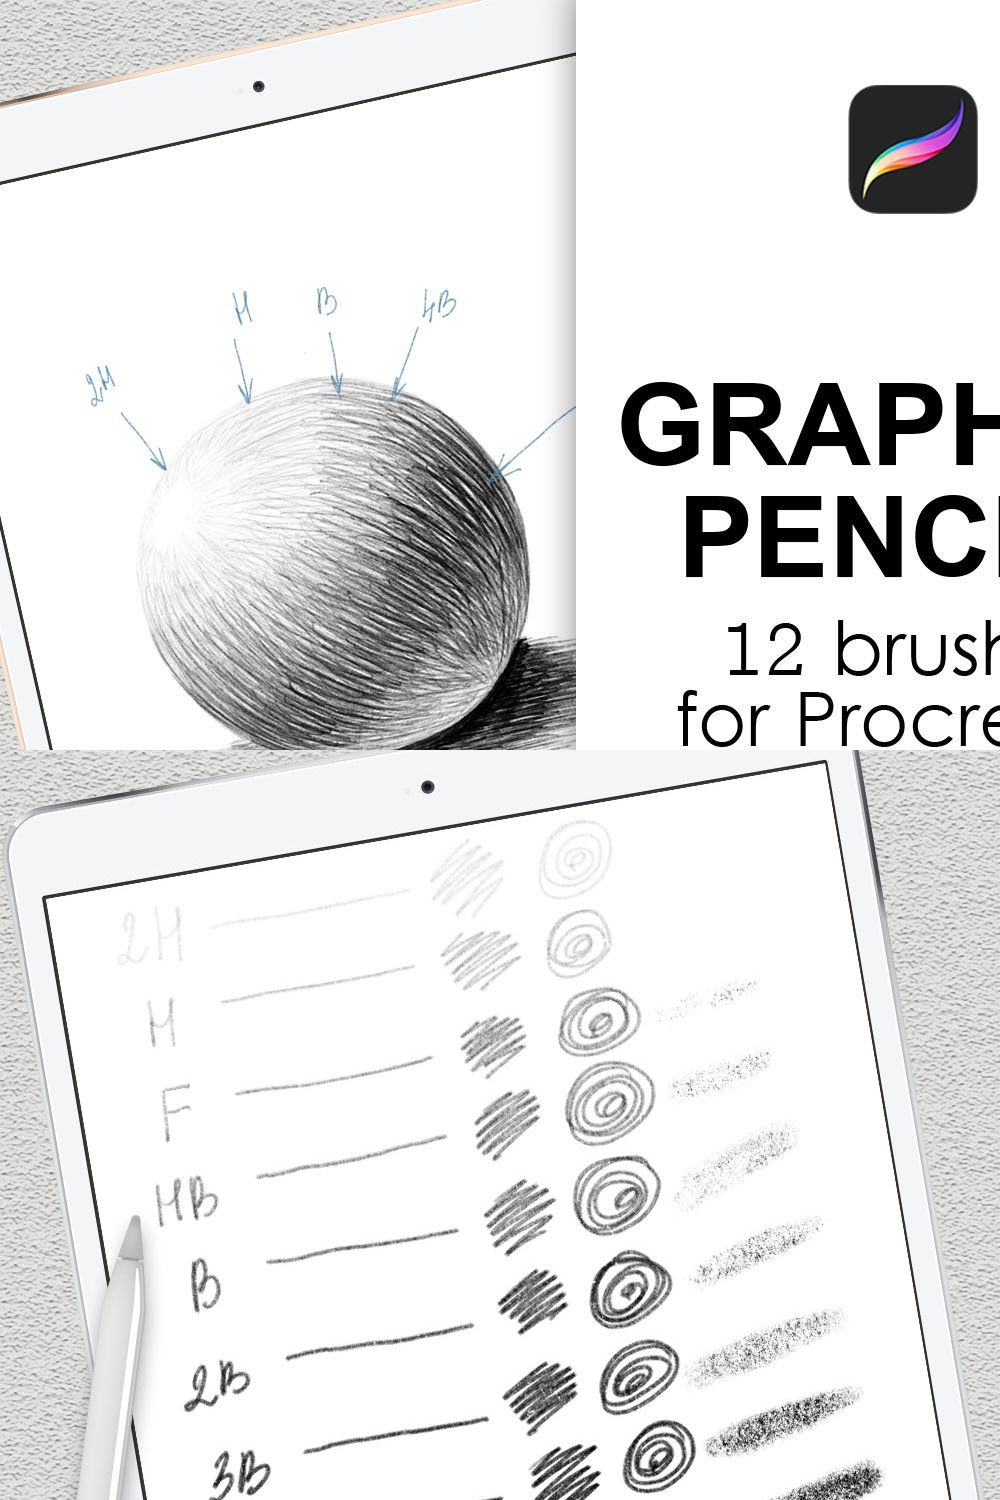 Graphite pencils procreate brushes pinterest preview image.